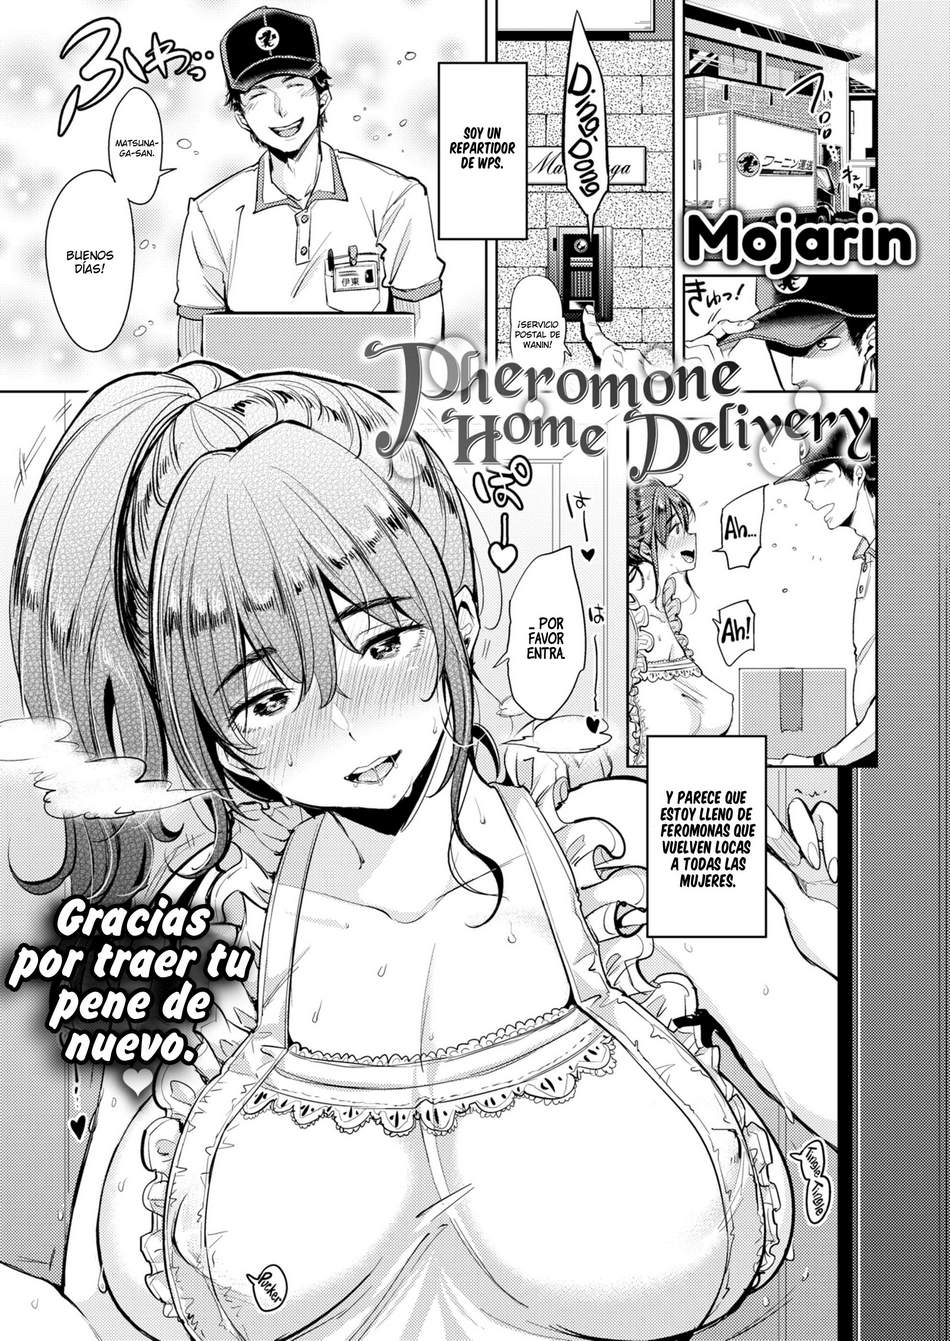 Pheromone Home Delivery - Page #1